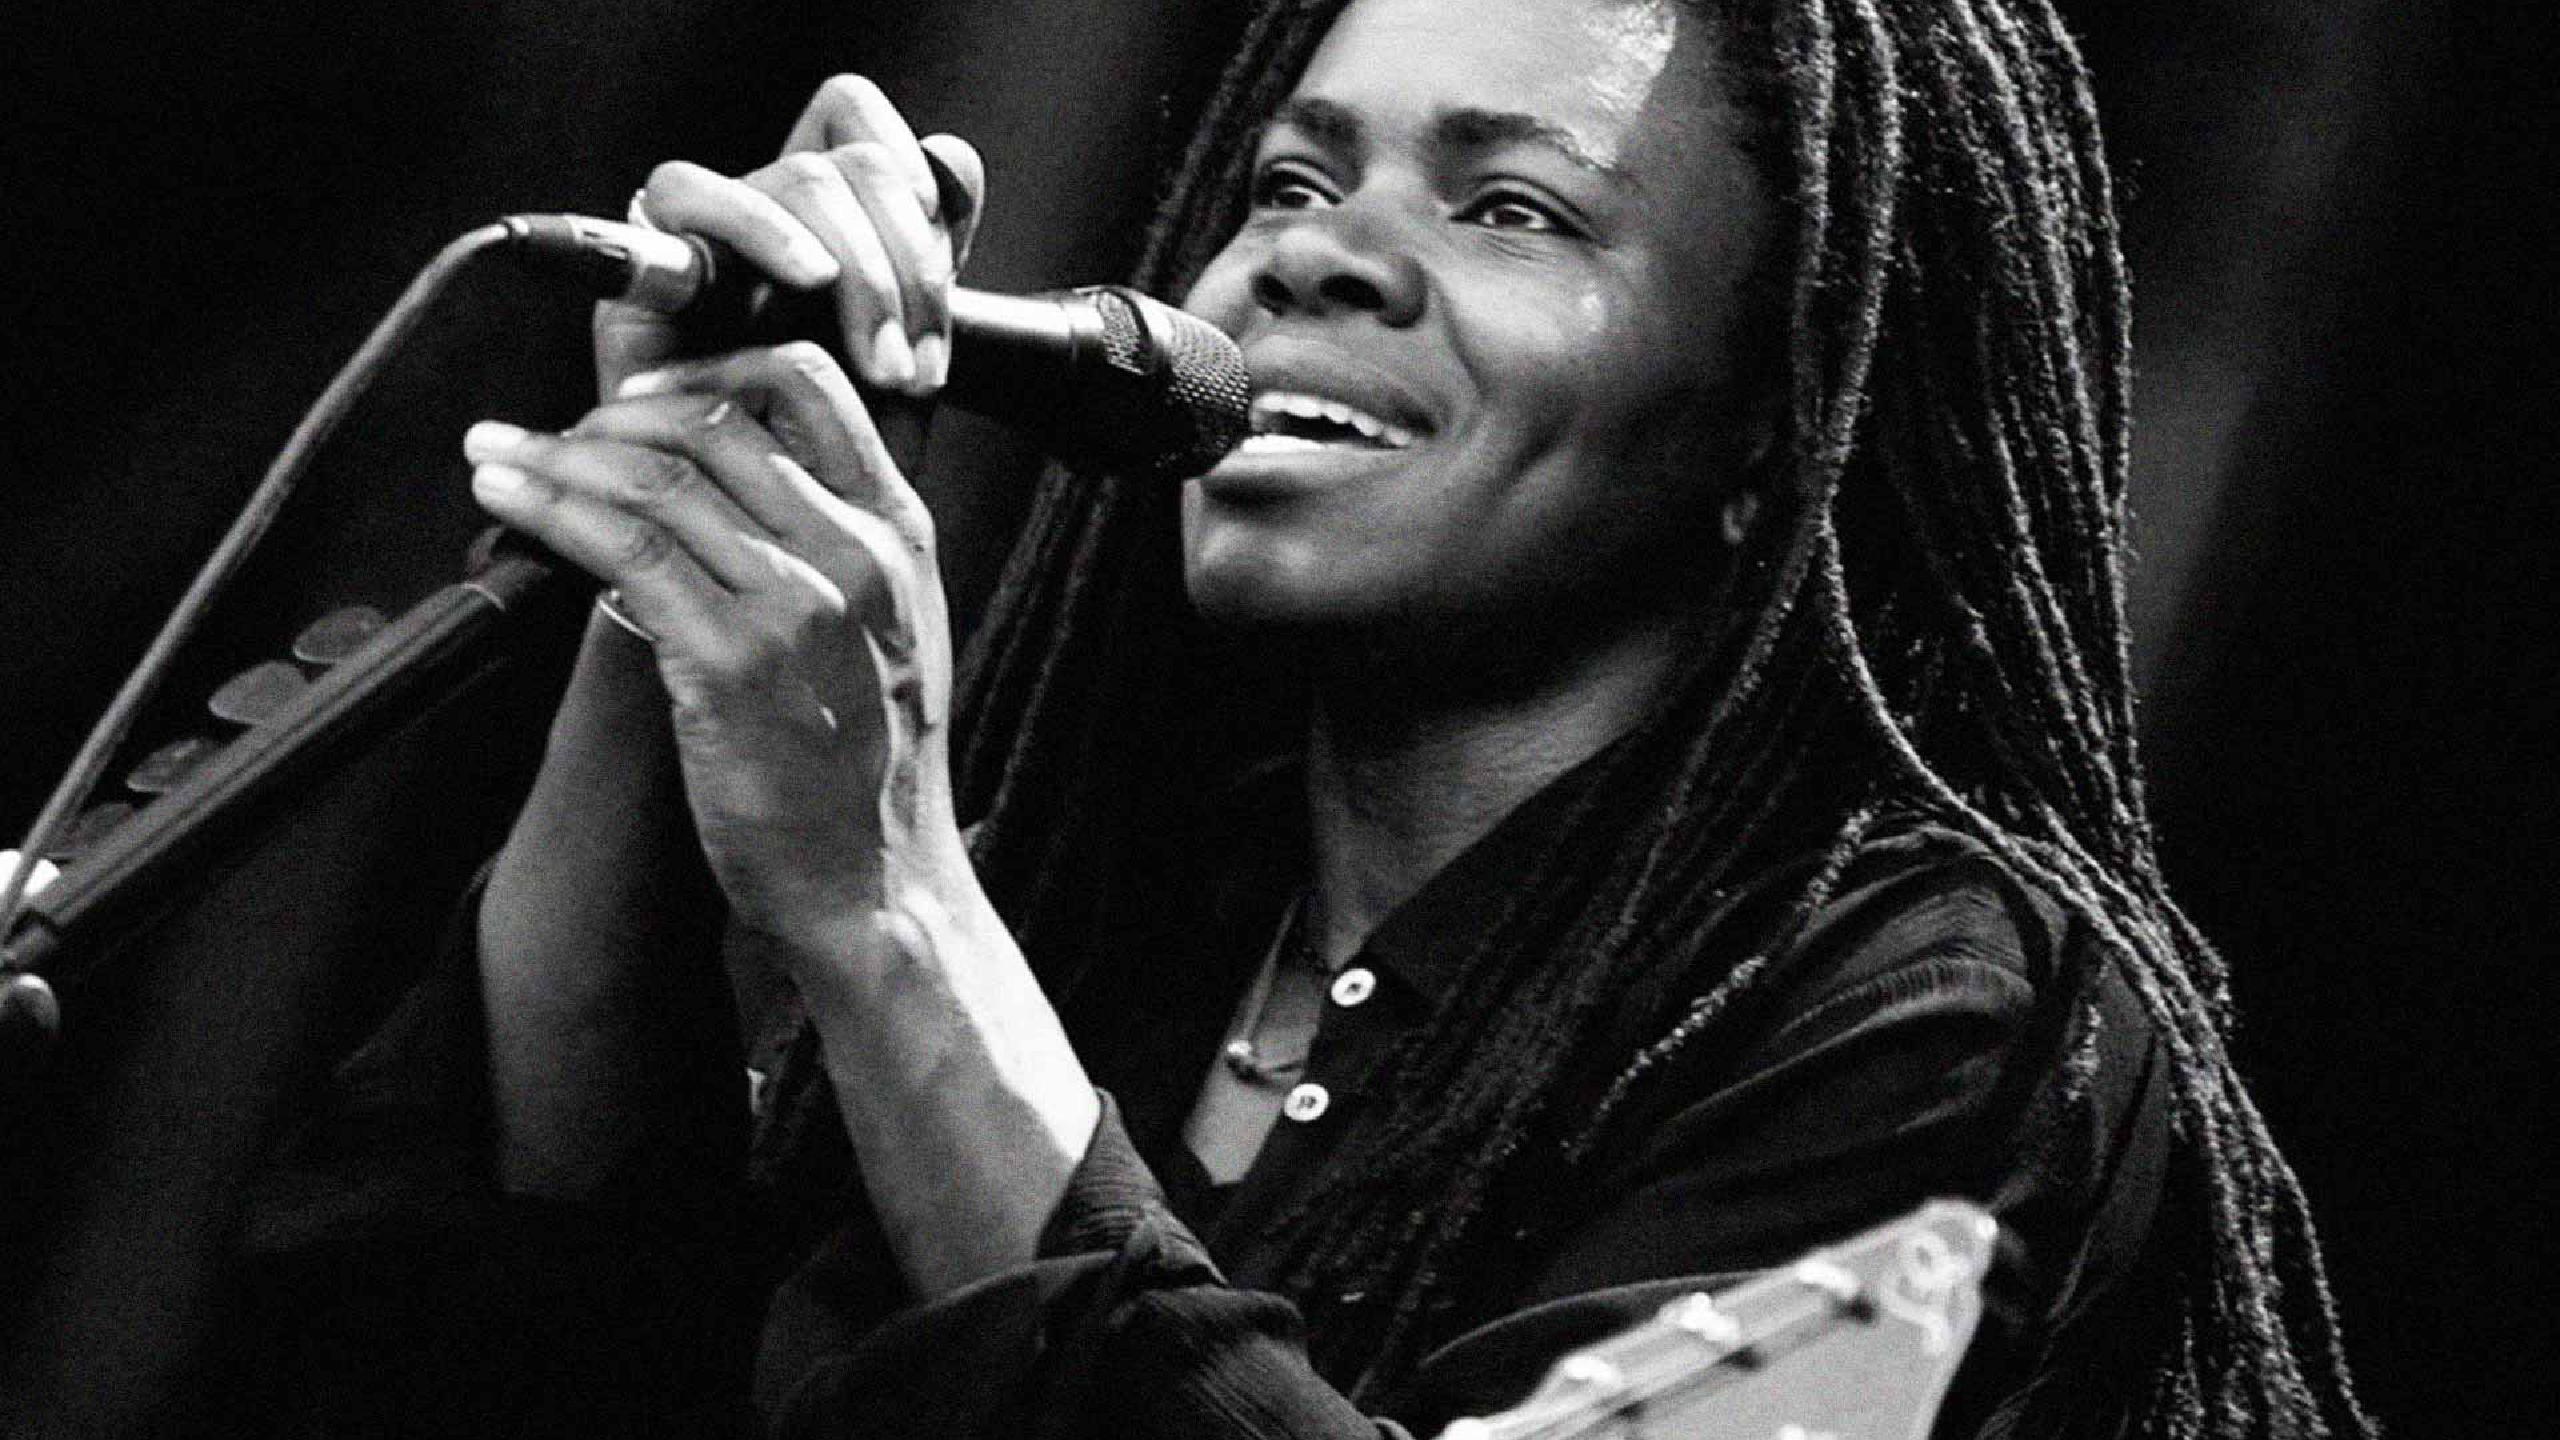 Tracy Chapman tour dates 2022 2023. Tracy Chapman tickets and concerts